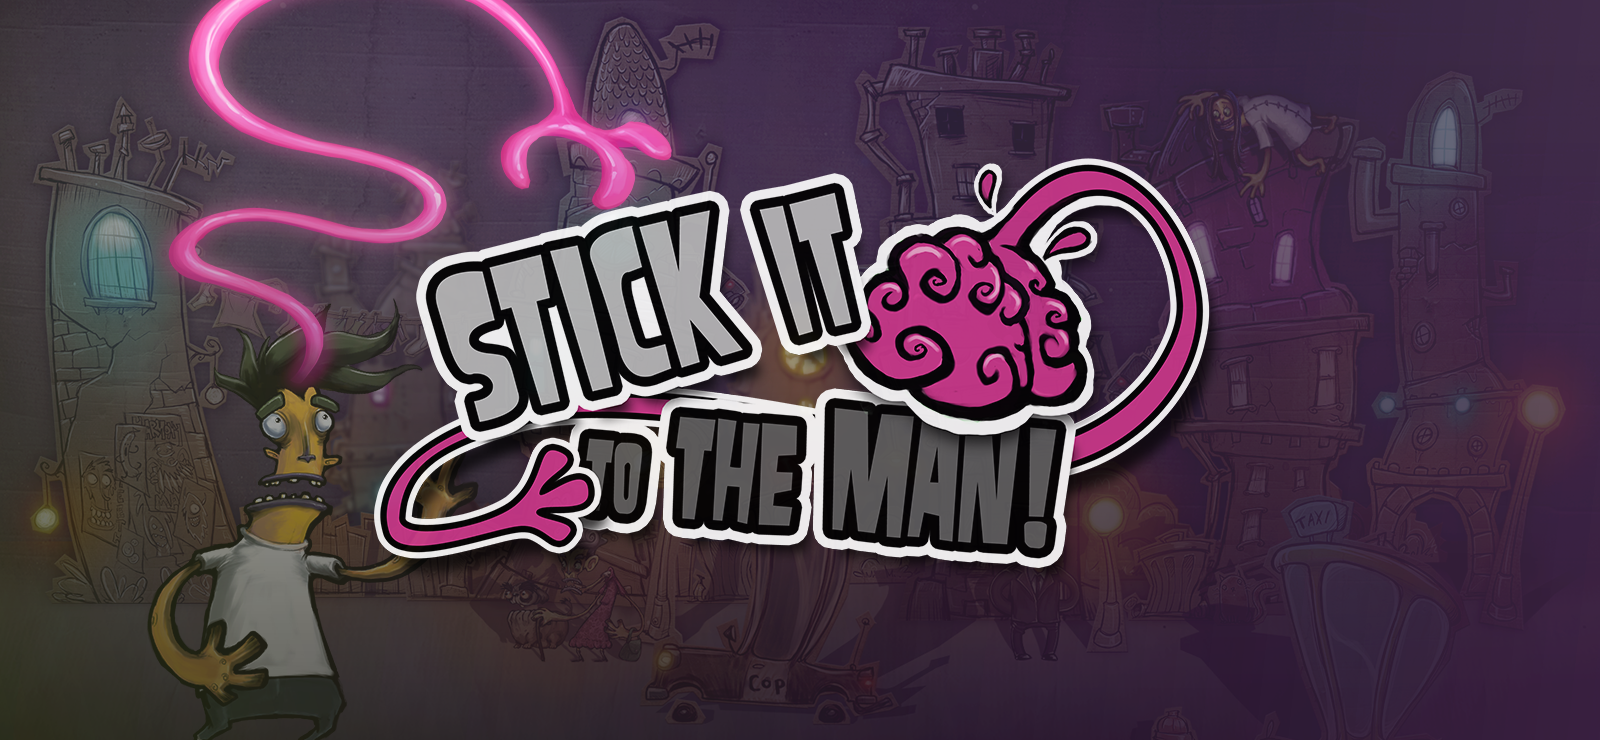 Stick It To The Man!